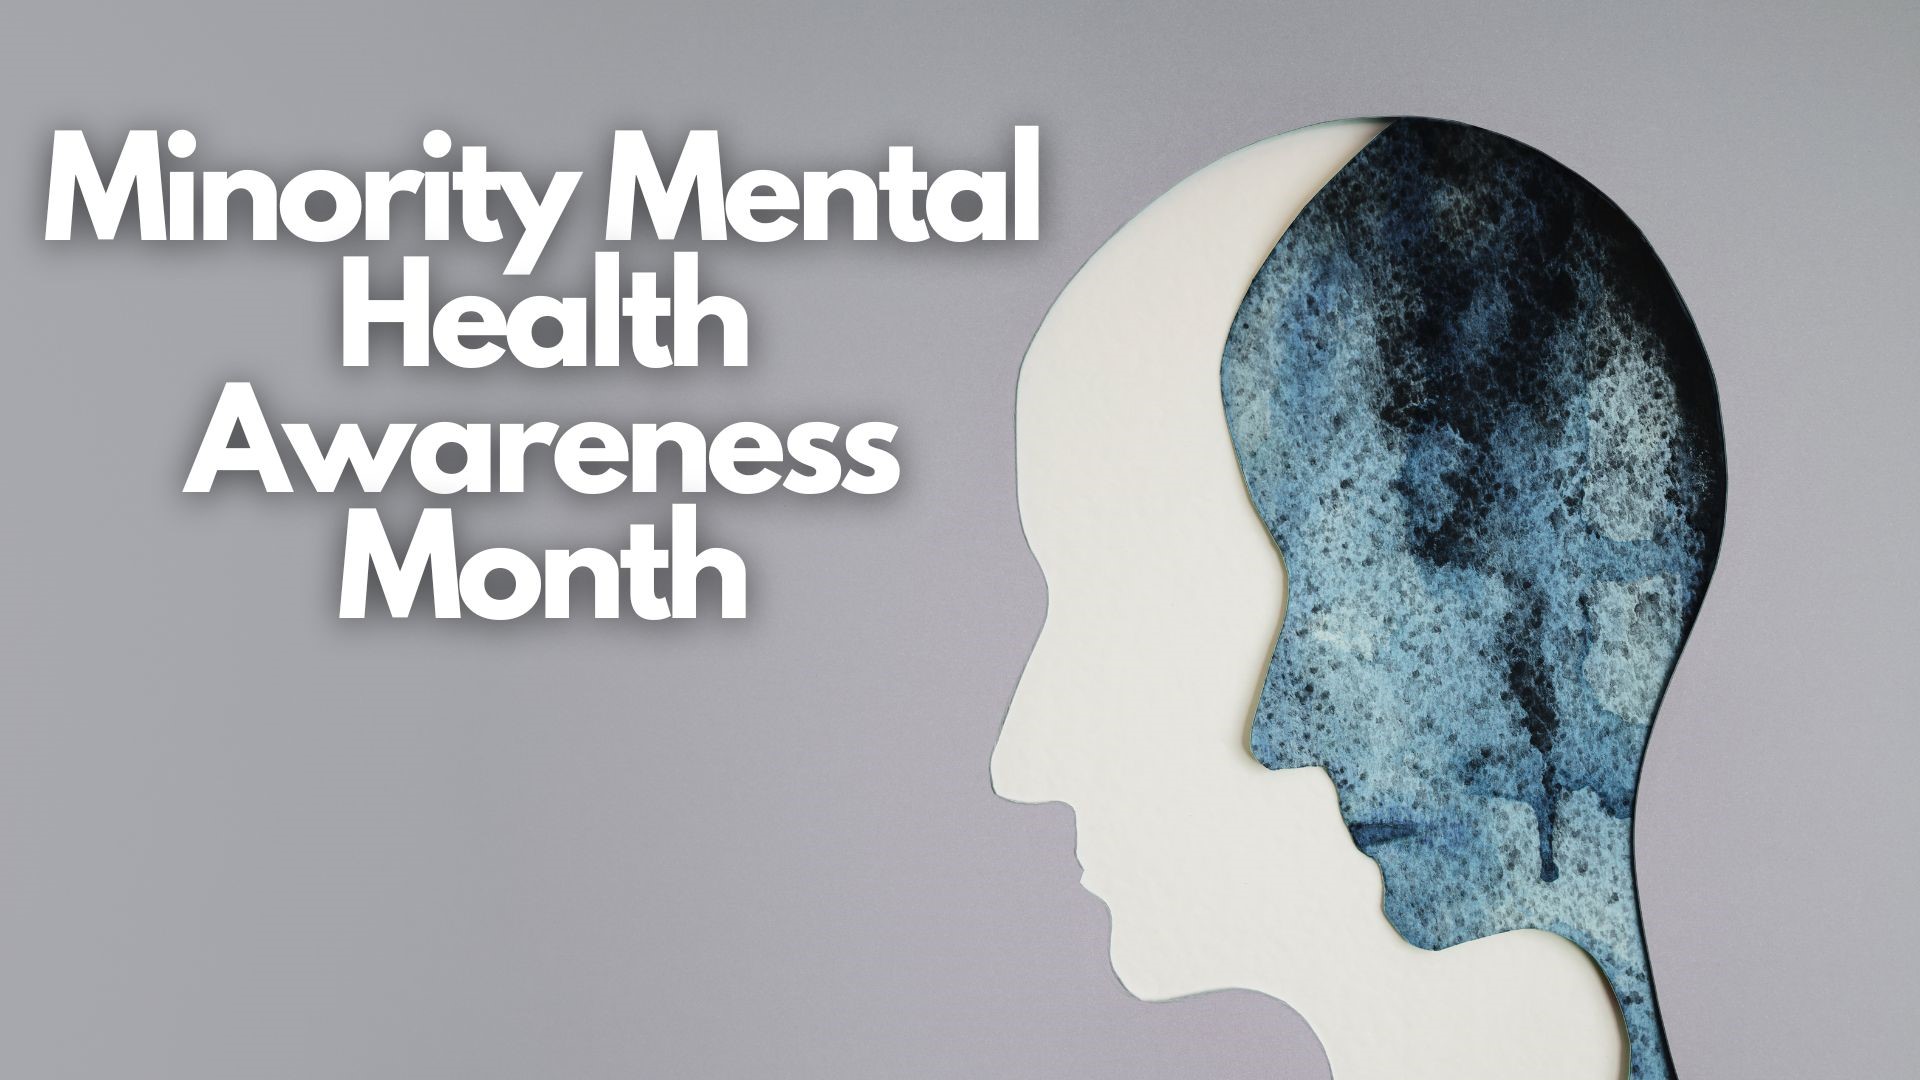 Experts address the stigma and barriers in minority communities when it comes to mental health